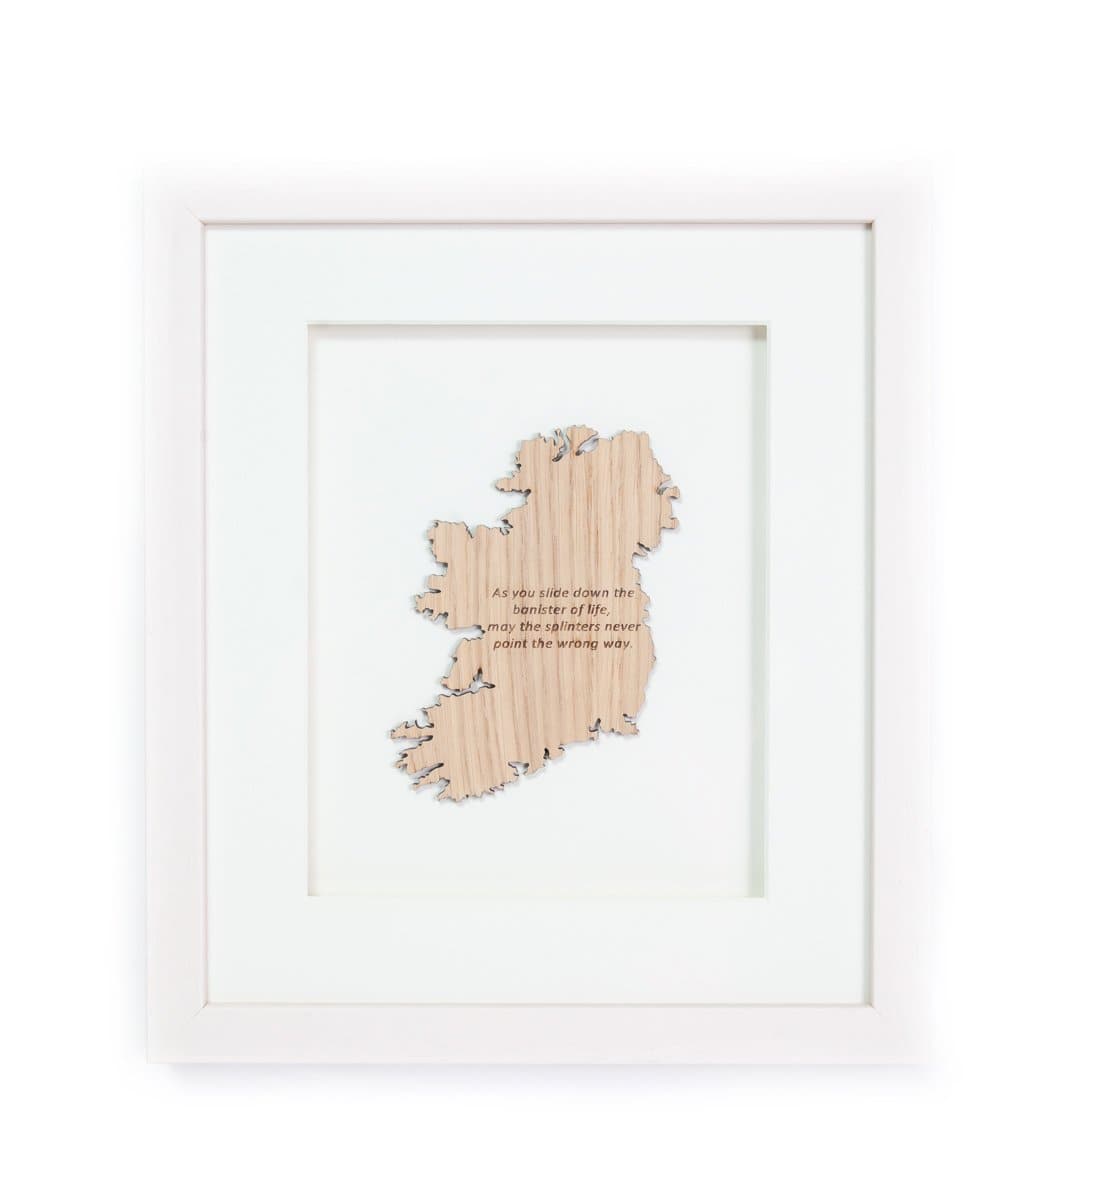 Good Luck Toast Good Luck Saying Wall Decor Made In Ireland Irish Humor Wall Hanging Unique Gift Crafted by Our Maker-Partner in Co. Meath